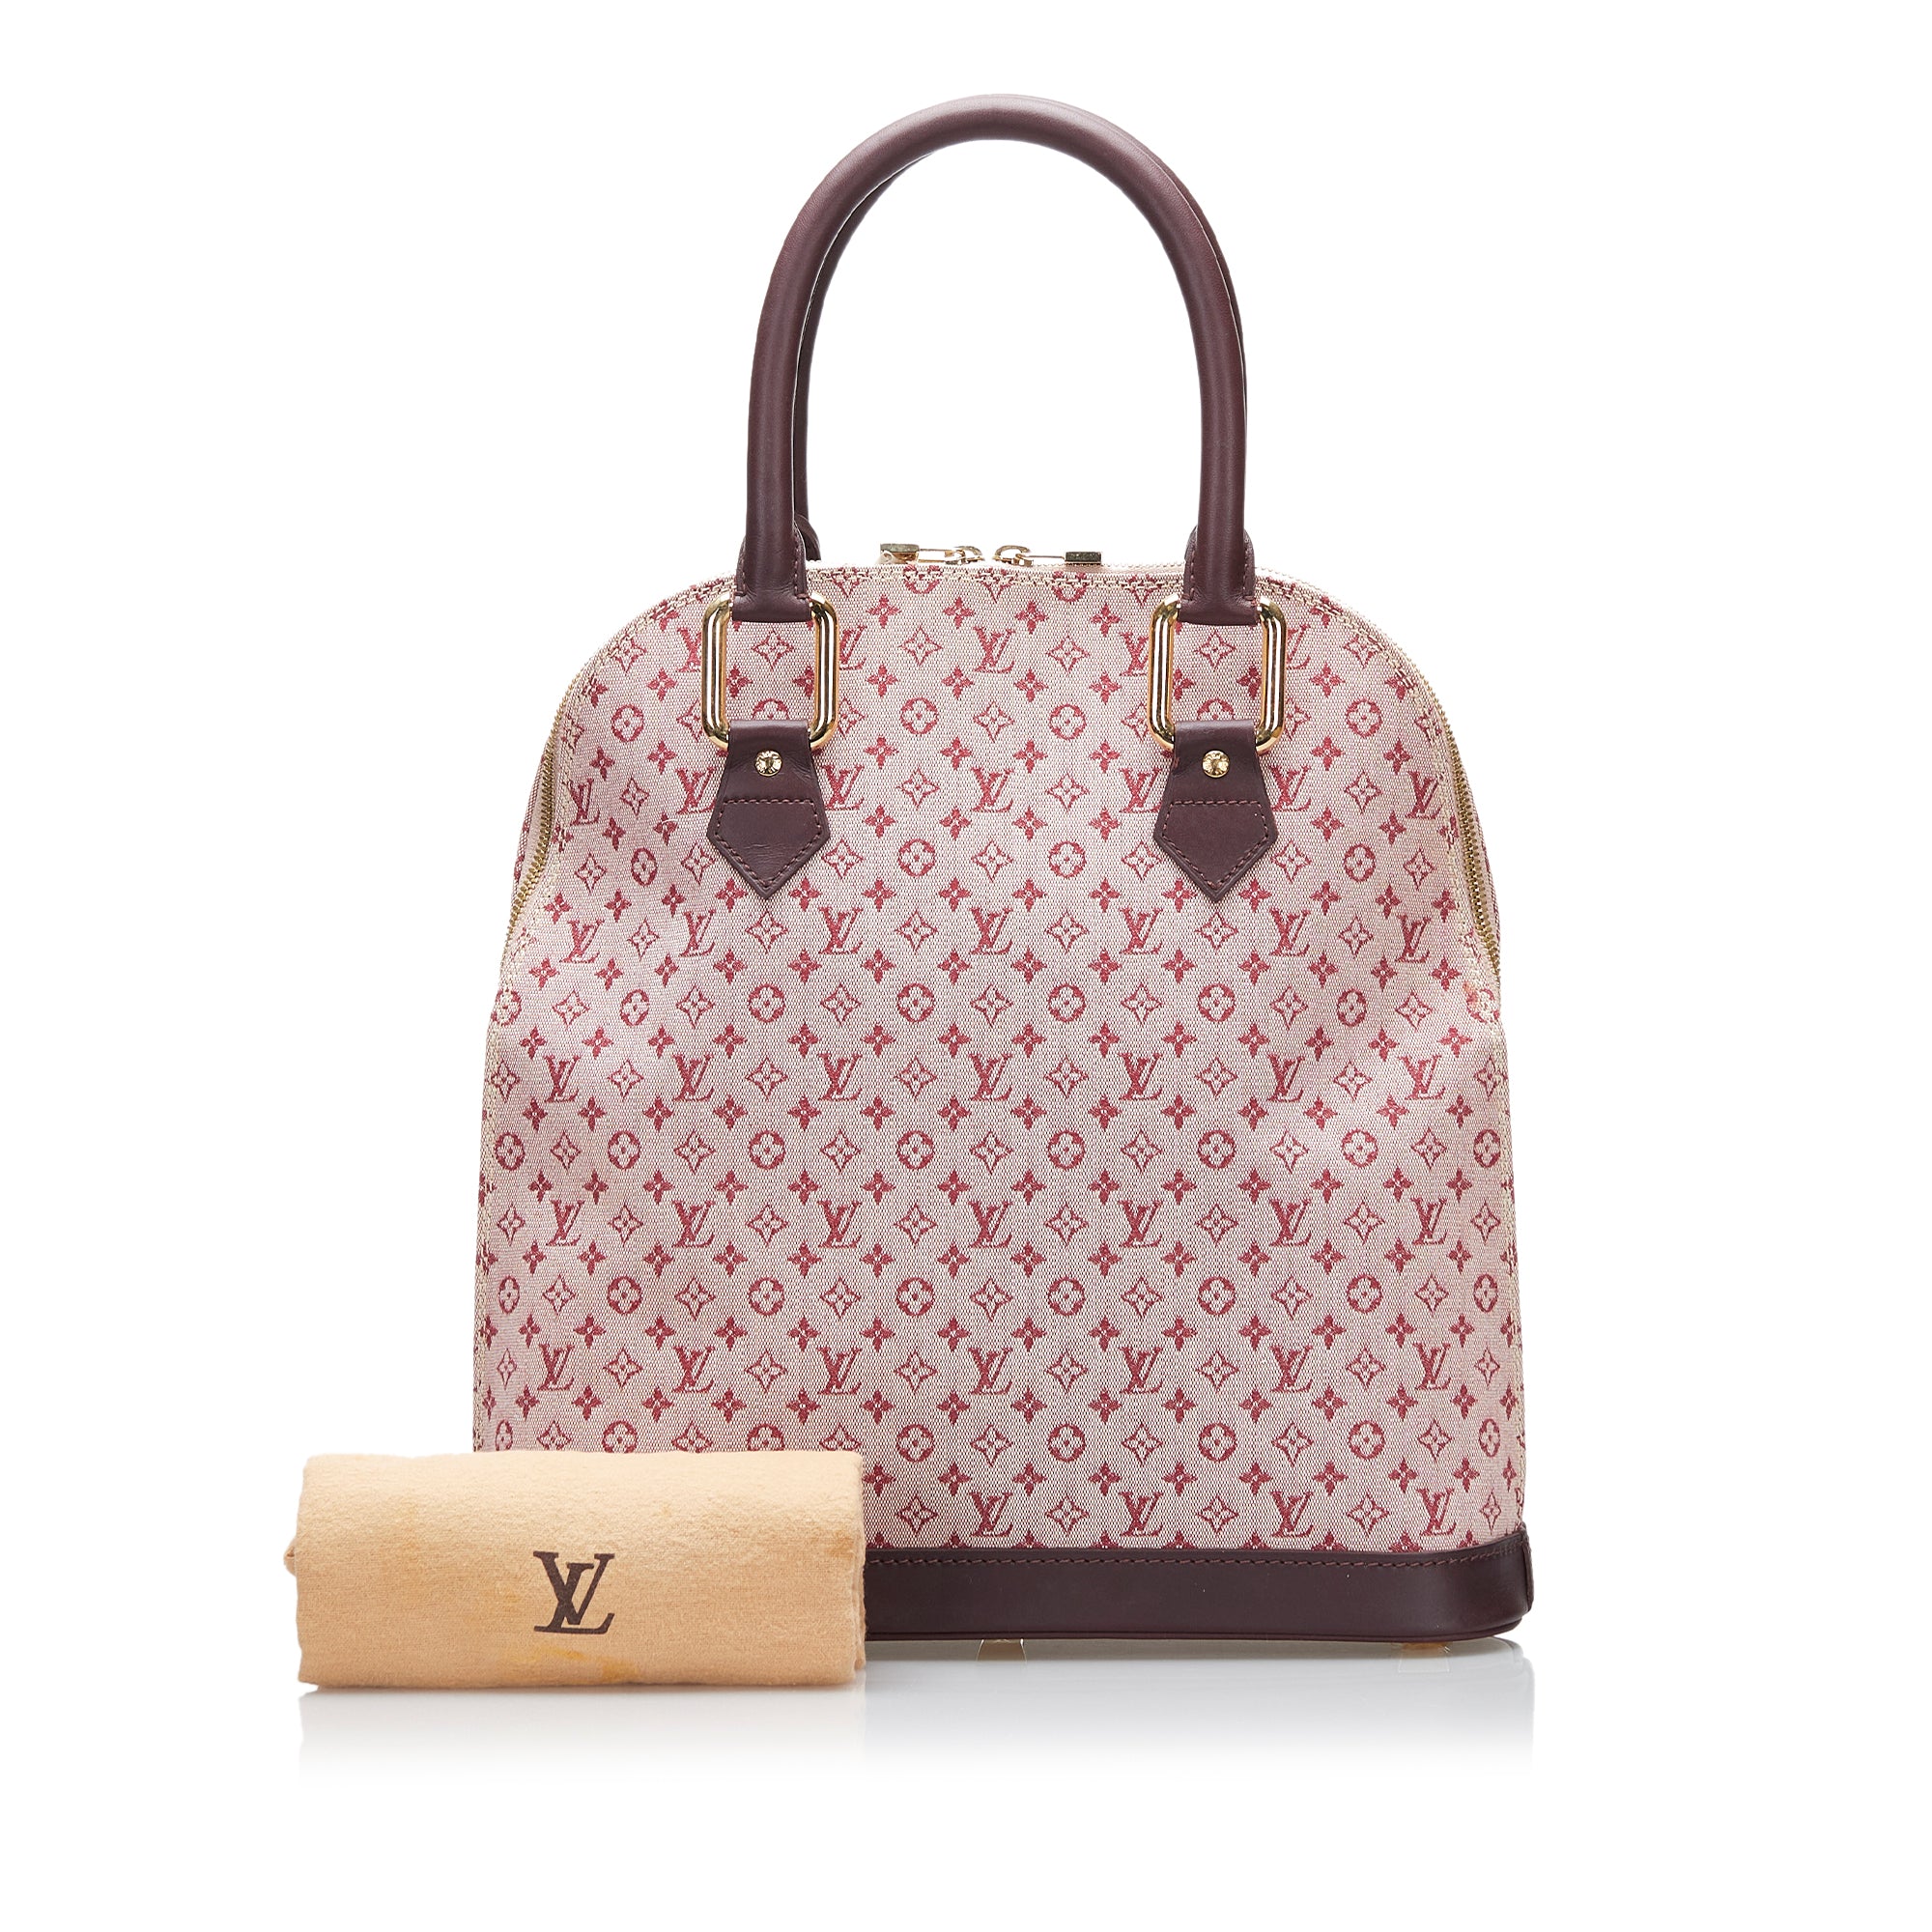 Louis Vuitton Pre-Owned Pre-Owned Bags